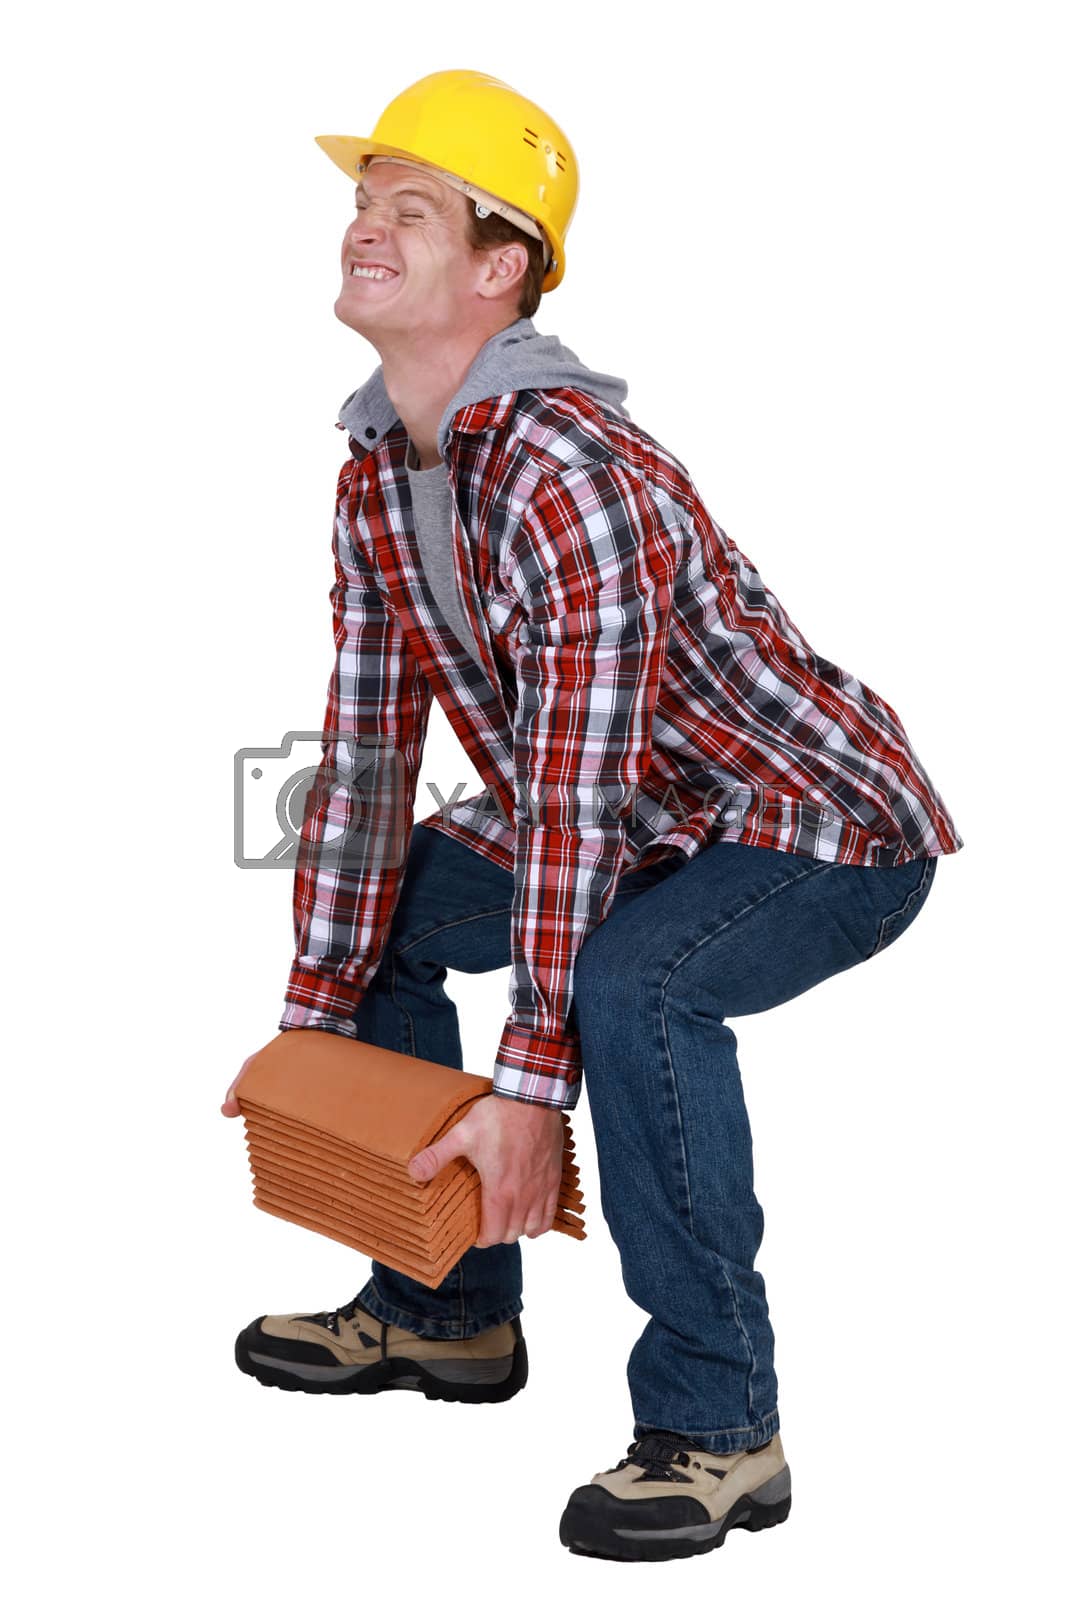 Royalty free image of Tradesman lifting a heavy load by phovoir